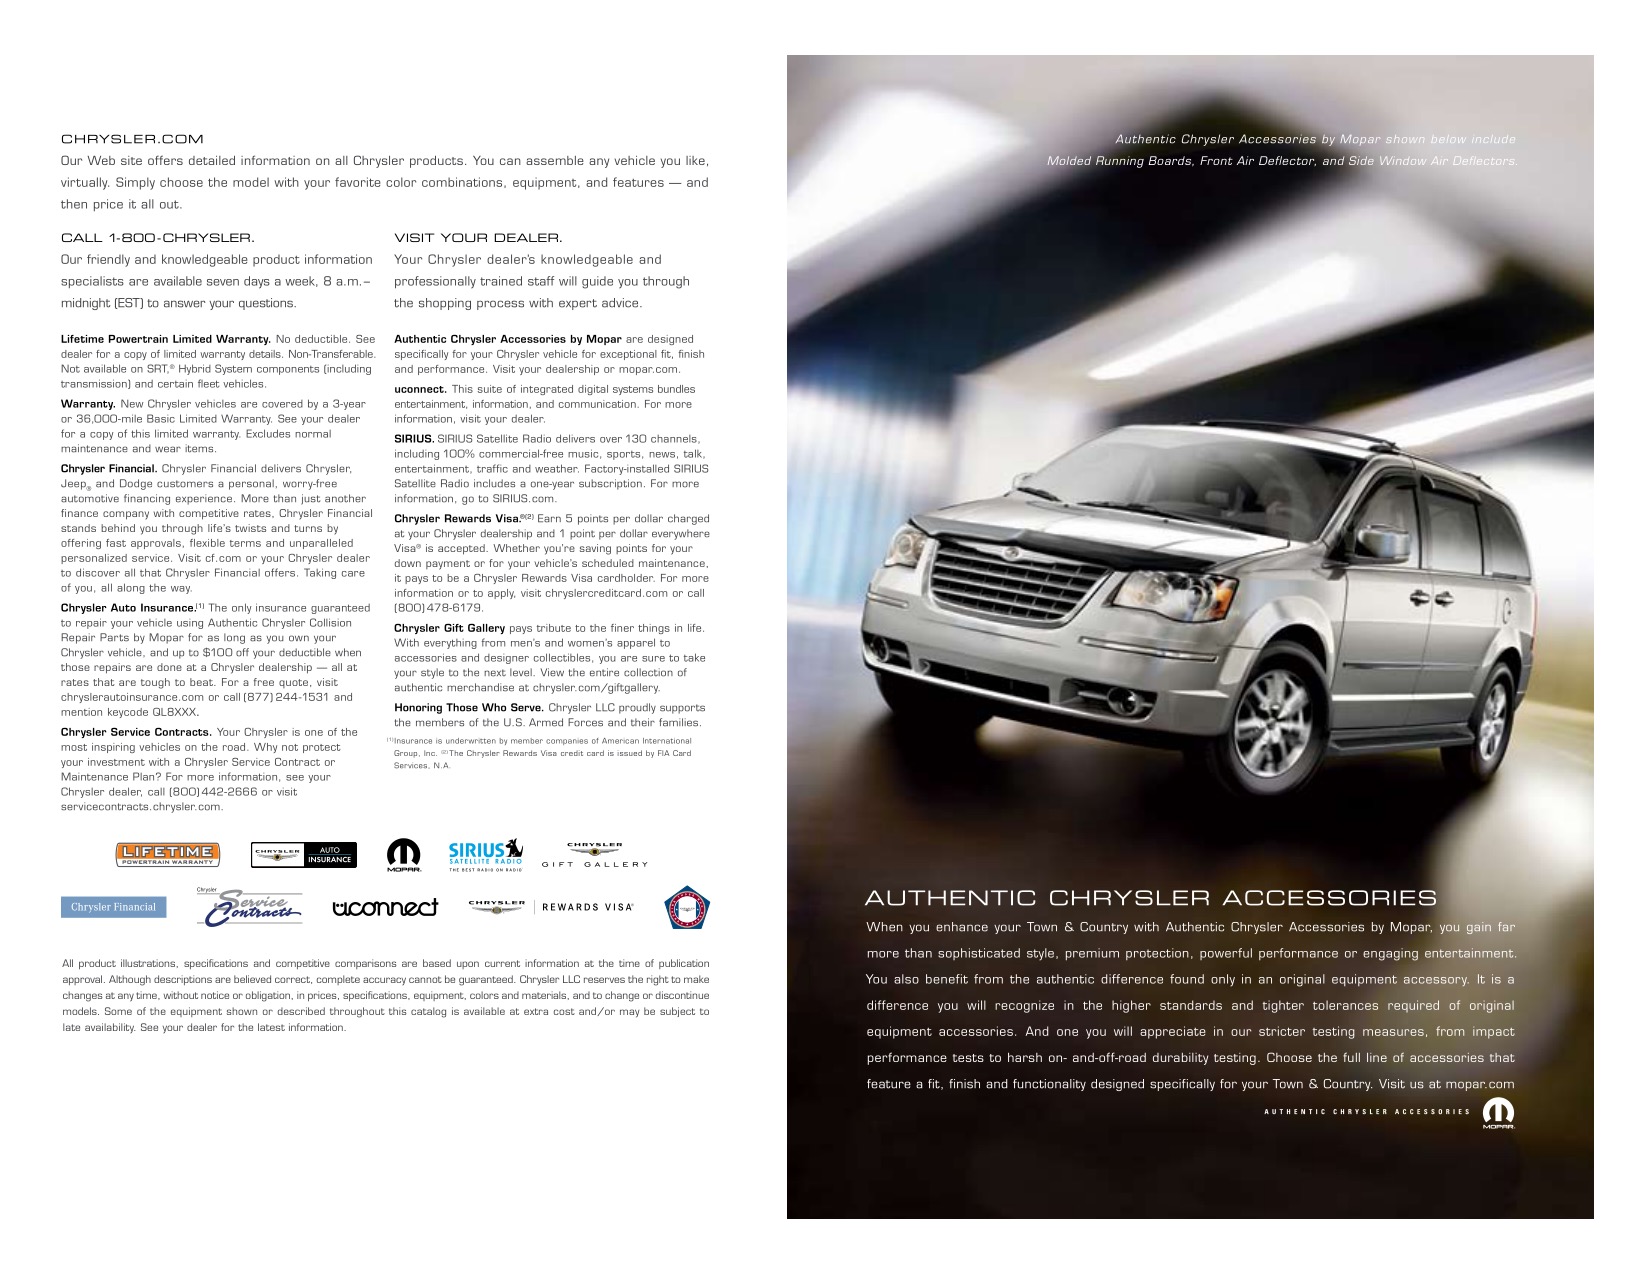 2009 Chrysler Town & Country Brochure Page 18